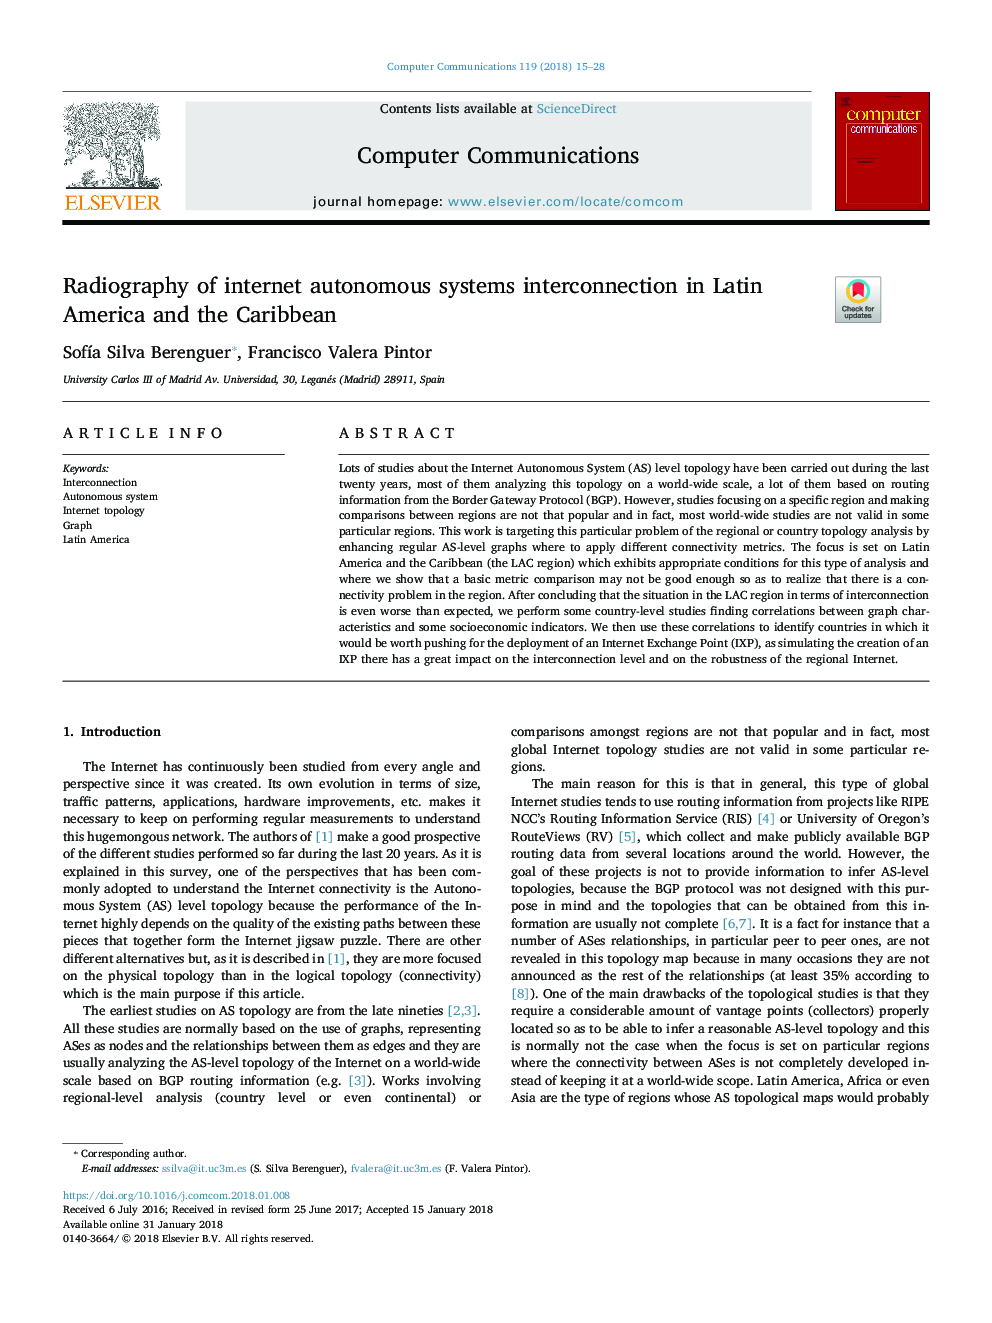 Radiography of internet autonomous systems interconnection in Latin America and the Caribbean